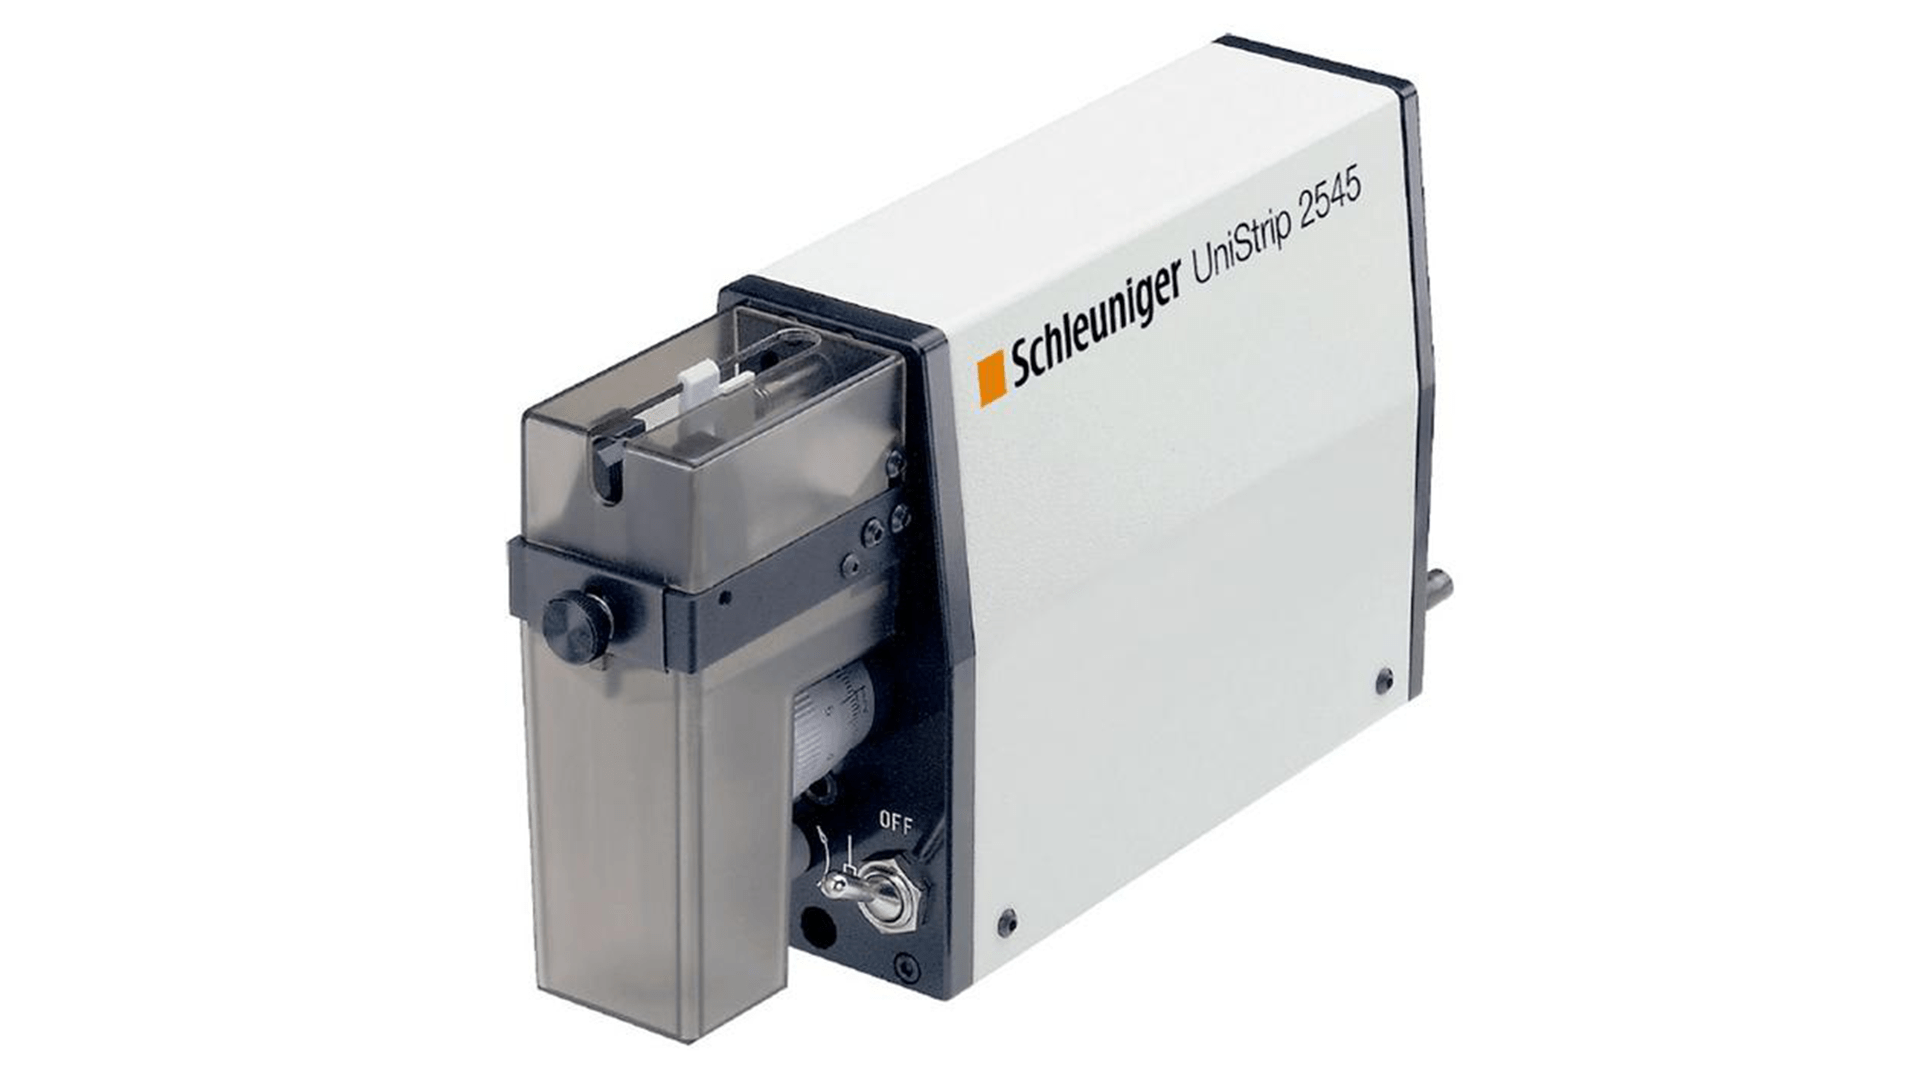 UniStrip 2545 Pneumatic Wire and Cable Stripping Machine